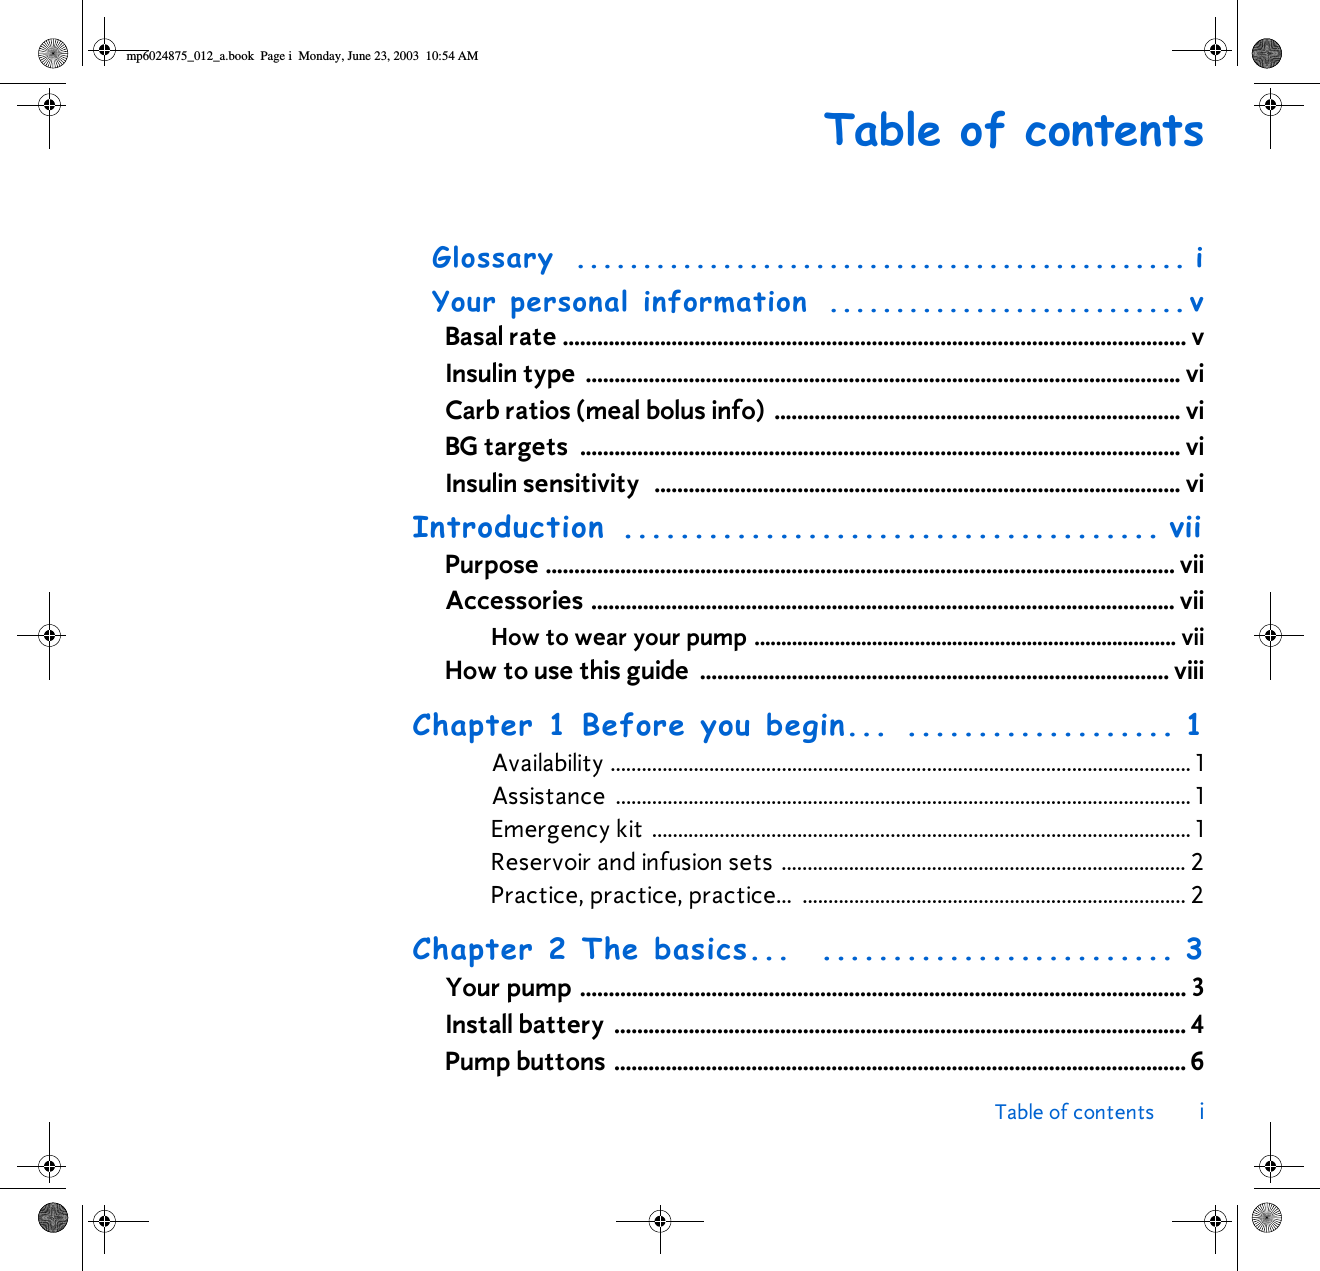 Table of contents iTable of contentsGlossary .............................................. iYour personal information  ...........................vBasal rate ............................................................................................................. vInsulin type  ........................................................................................................ viCarb ratios (meal bolus info)  ....................................................................... viBG targets  ......................................................................................................... viInsulin sensitivity   ............................................................................................ viIntroduction ...................................... viiPurpose .............................................................................................................. viiAccessories ...................................................................................................... viiHow to wear your pump ............................................................................... viiHow to use this guide  .................................................................................. viiiChapter 1 Before you begin... ................... 1Availability ................................................................................................................ 1Assistance ............................................................................................................... 1Emergency kit ........................................................................................................ 1Reservoir and infusion sets .............................................................................. 2Practice, practice, practice...  .......................................................................... 2Chapter 2 The basics...  ......................... 3Your pump .......................................................................................................... 3Install battery  .................................................................................................... 4Pump buttons .................................................................................................... 6mp6024875_012_a.book  Page i  Monday, June 23, 2003  10:54 AM